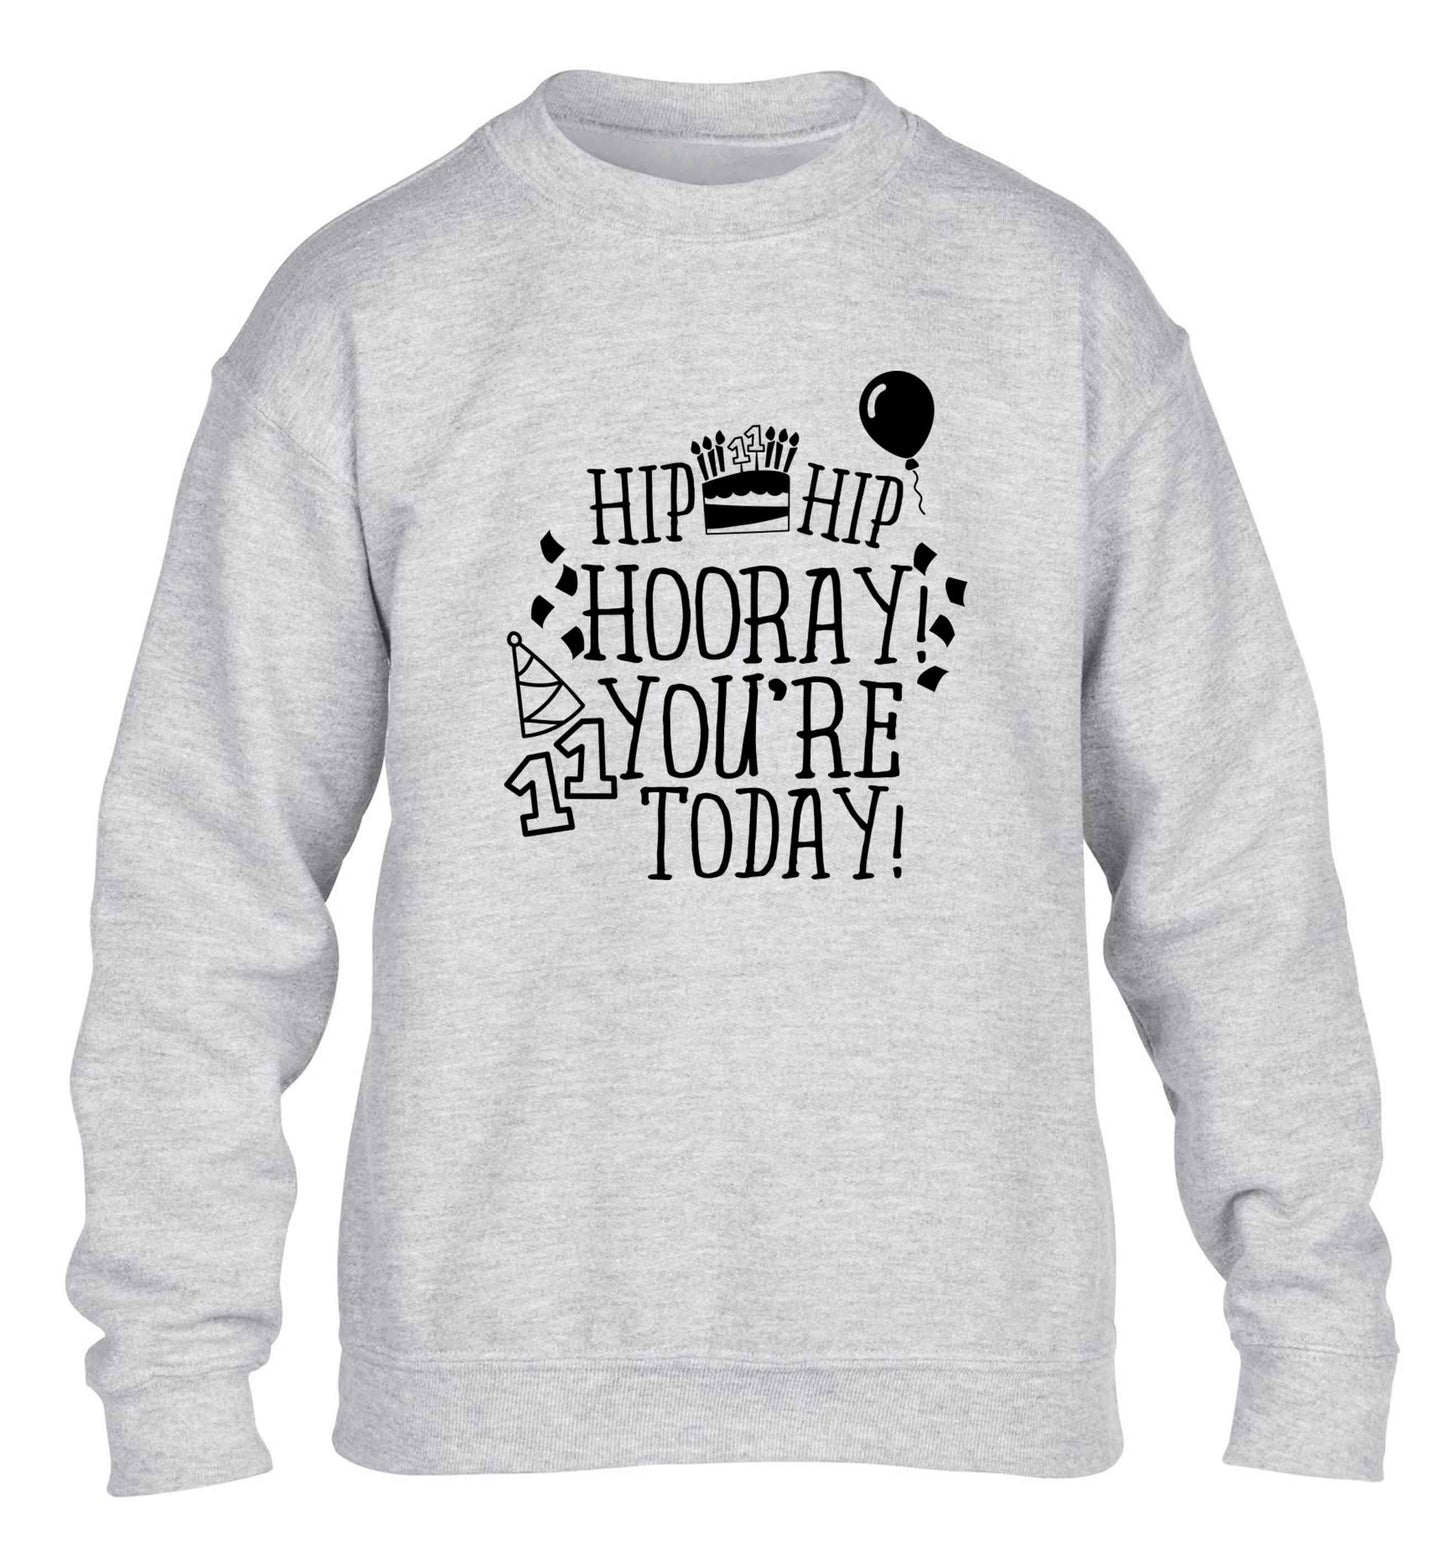 Hip hip hooray I you're eleven today! children's grey sweater 12-13 Years